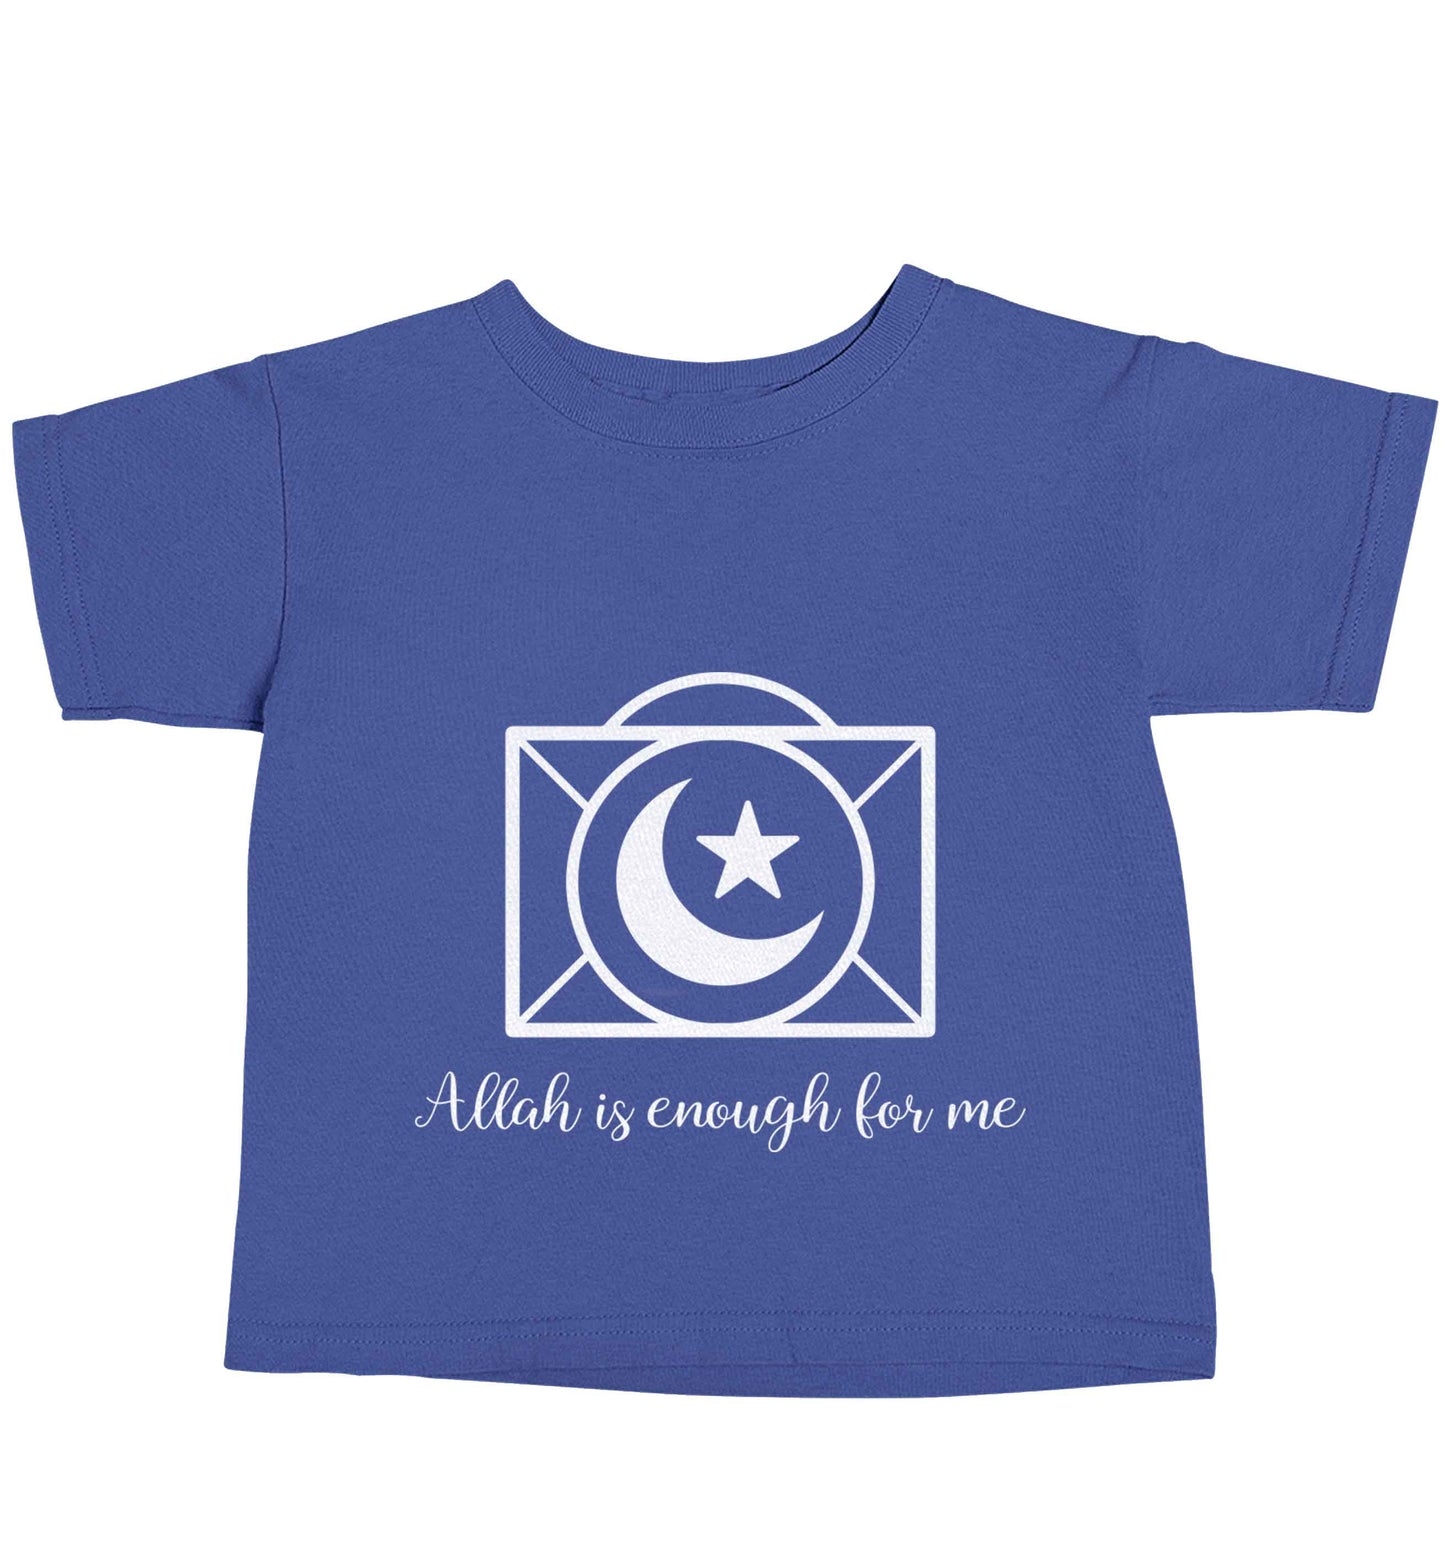 Allah is enough for me blue baby toddler Tshirt 2 Years